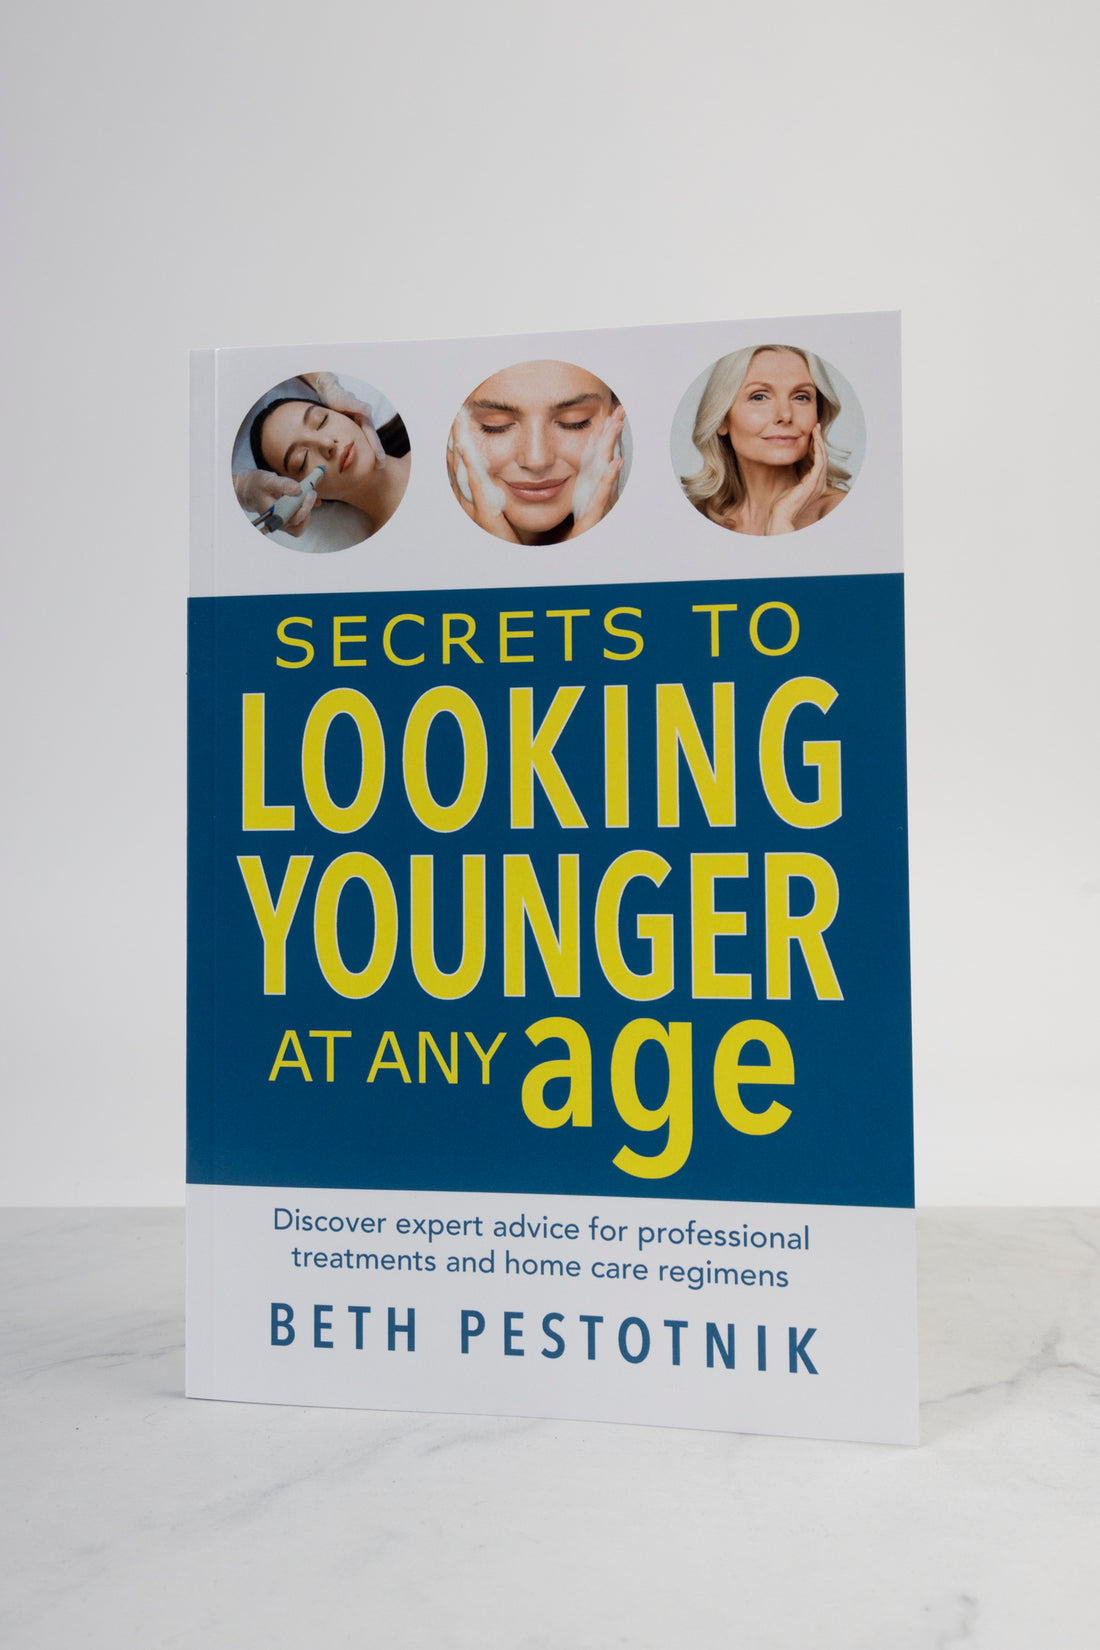 Secrets To Looking Younger At Any Age by Beth Pestotnik